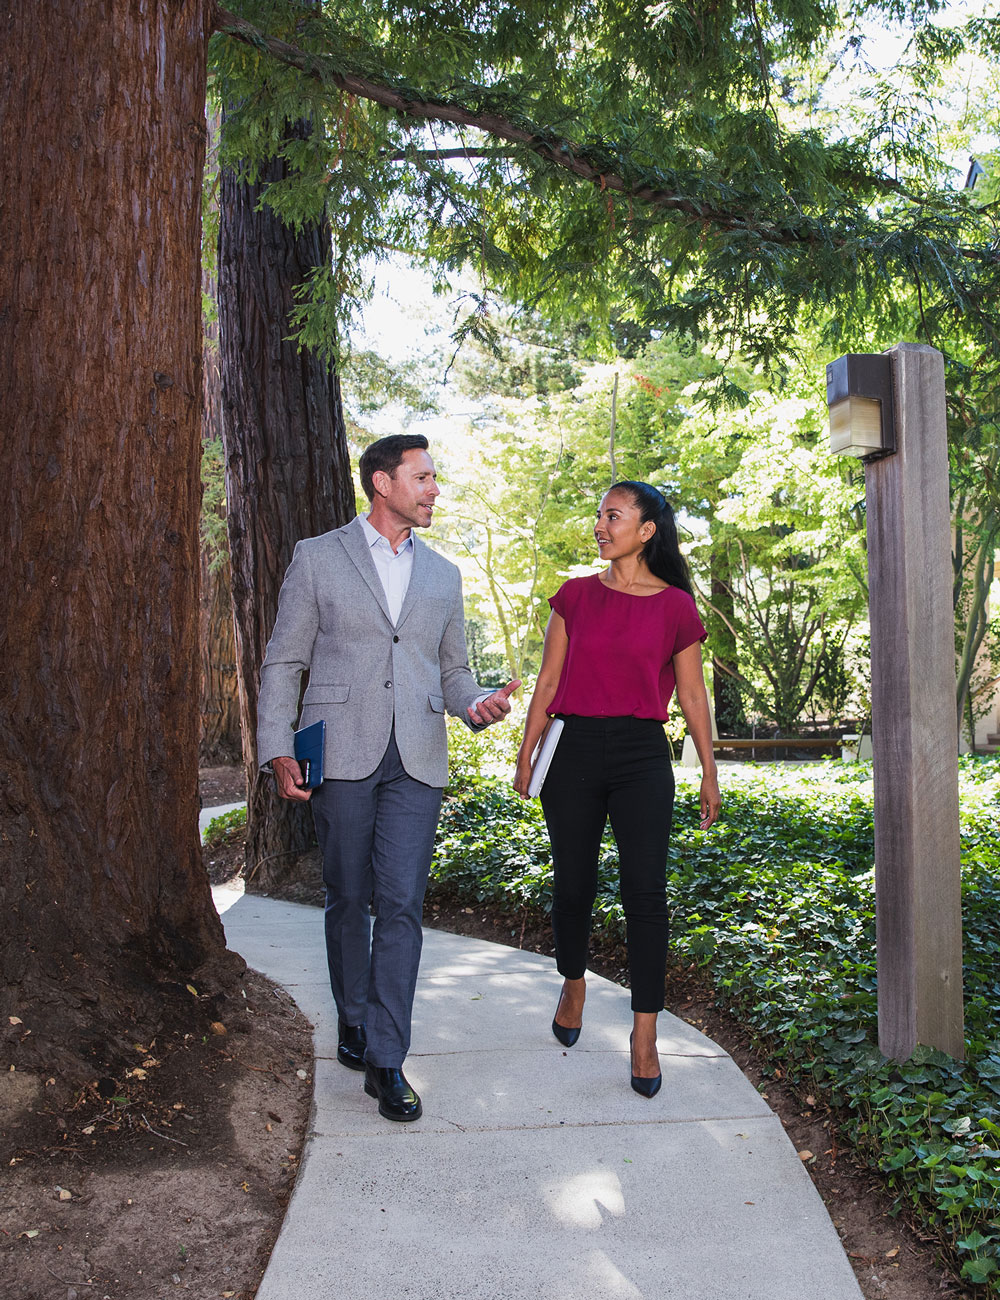 A man and woman walk together down a sidewalk surrounded by greenery